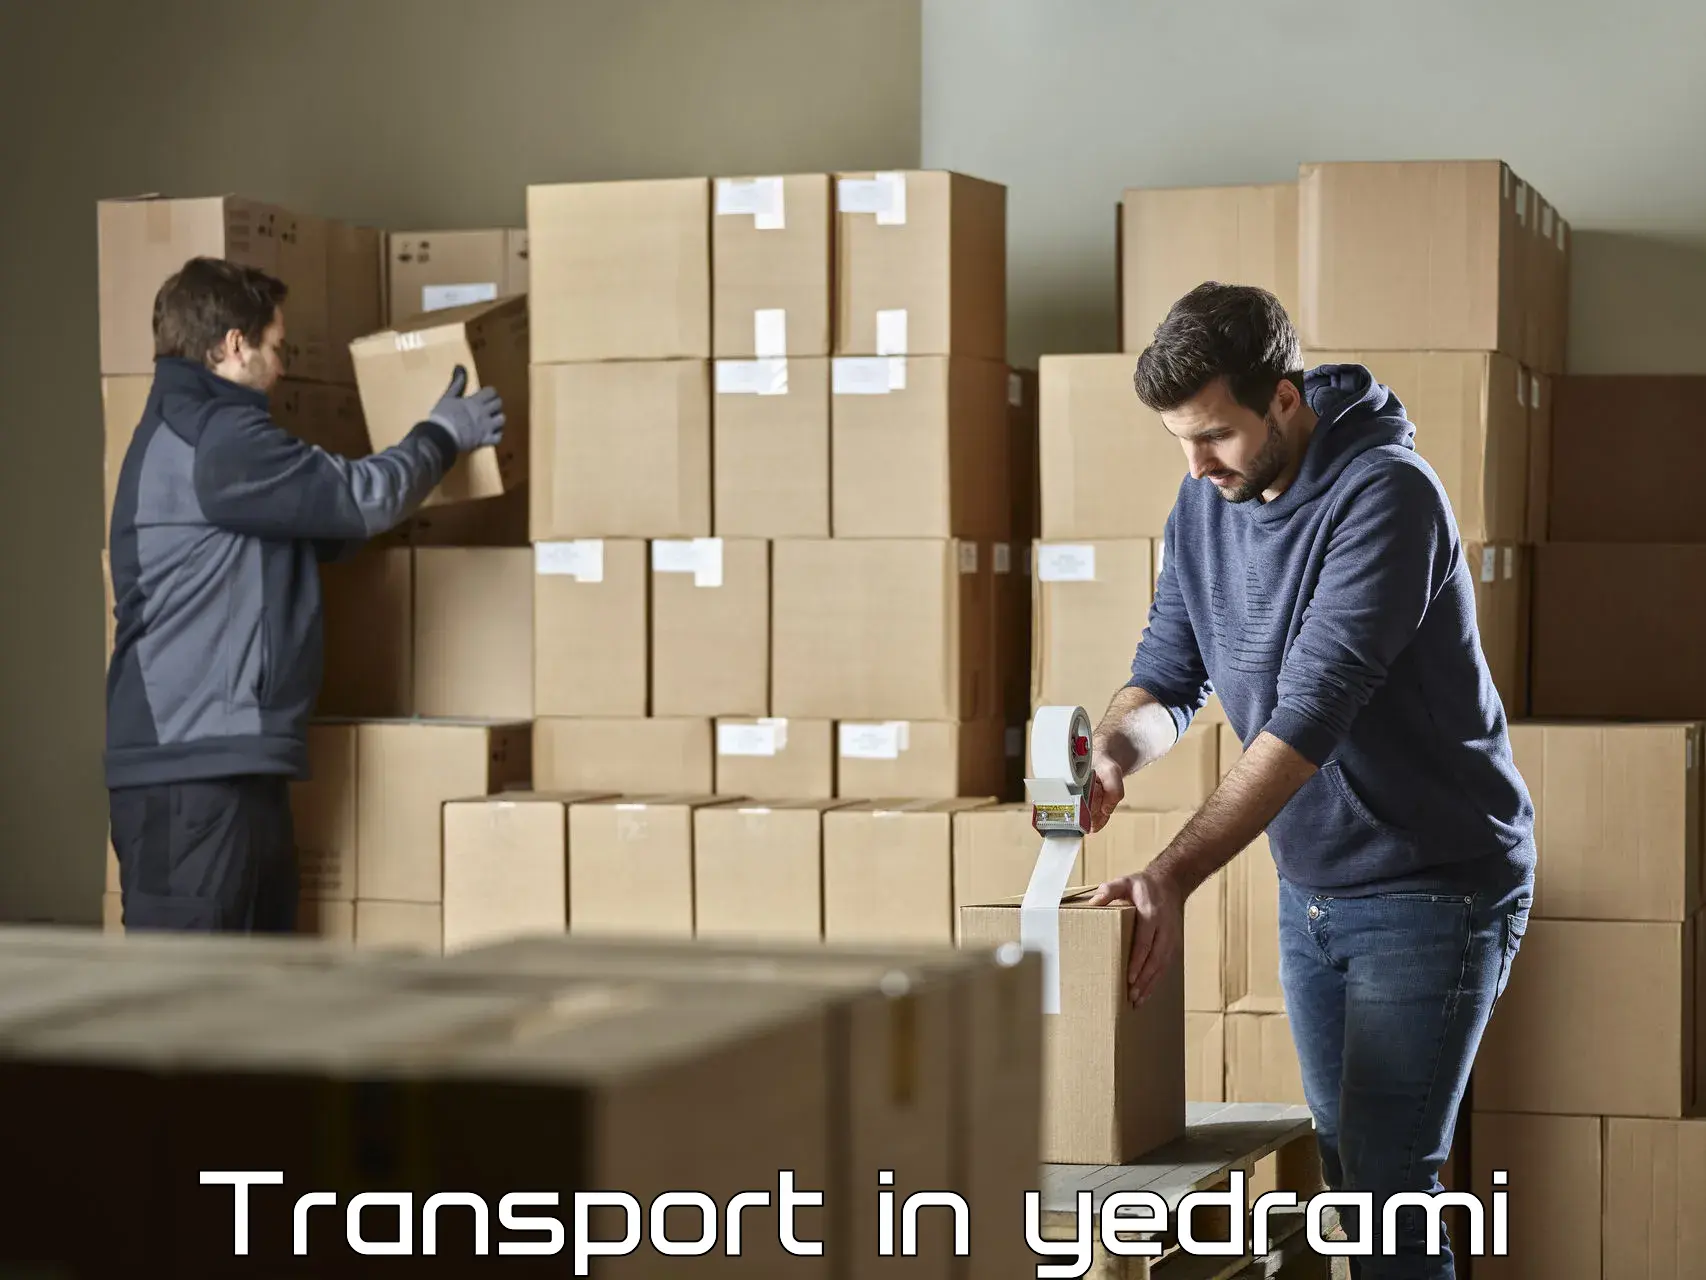 Transport services in yedrami